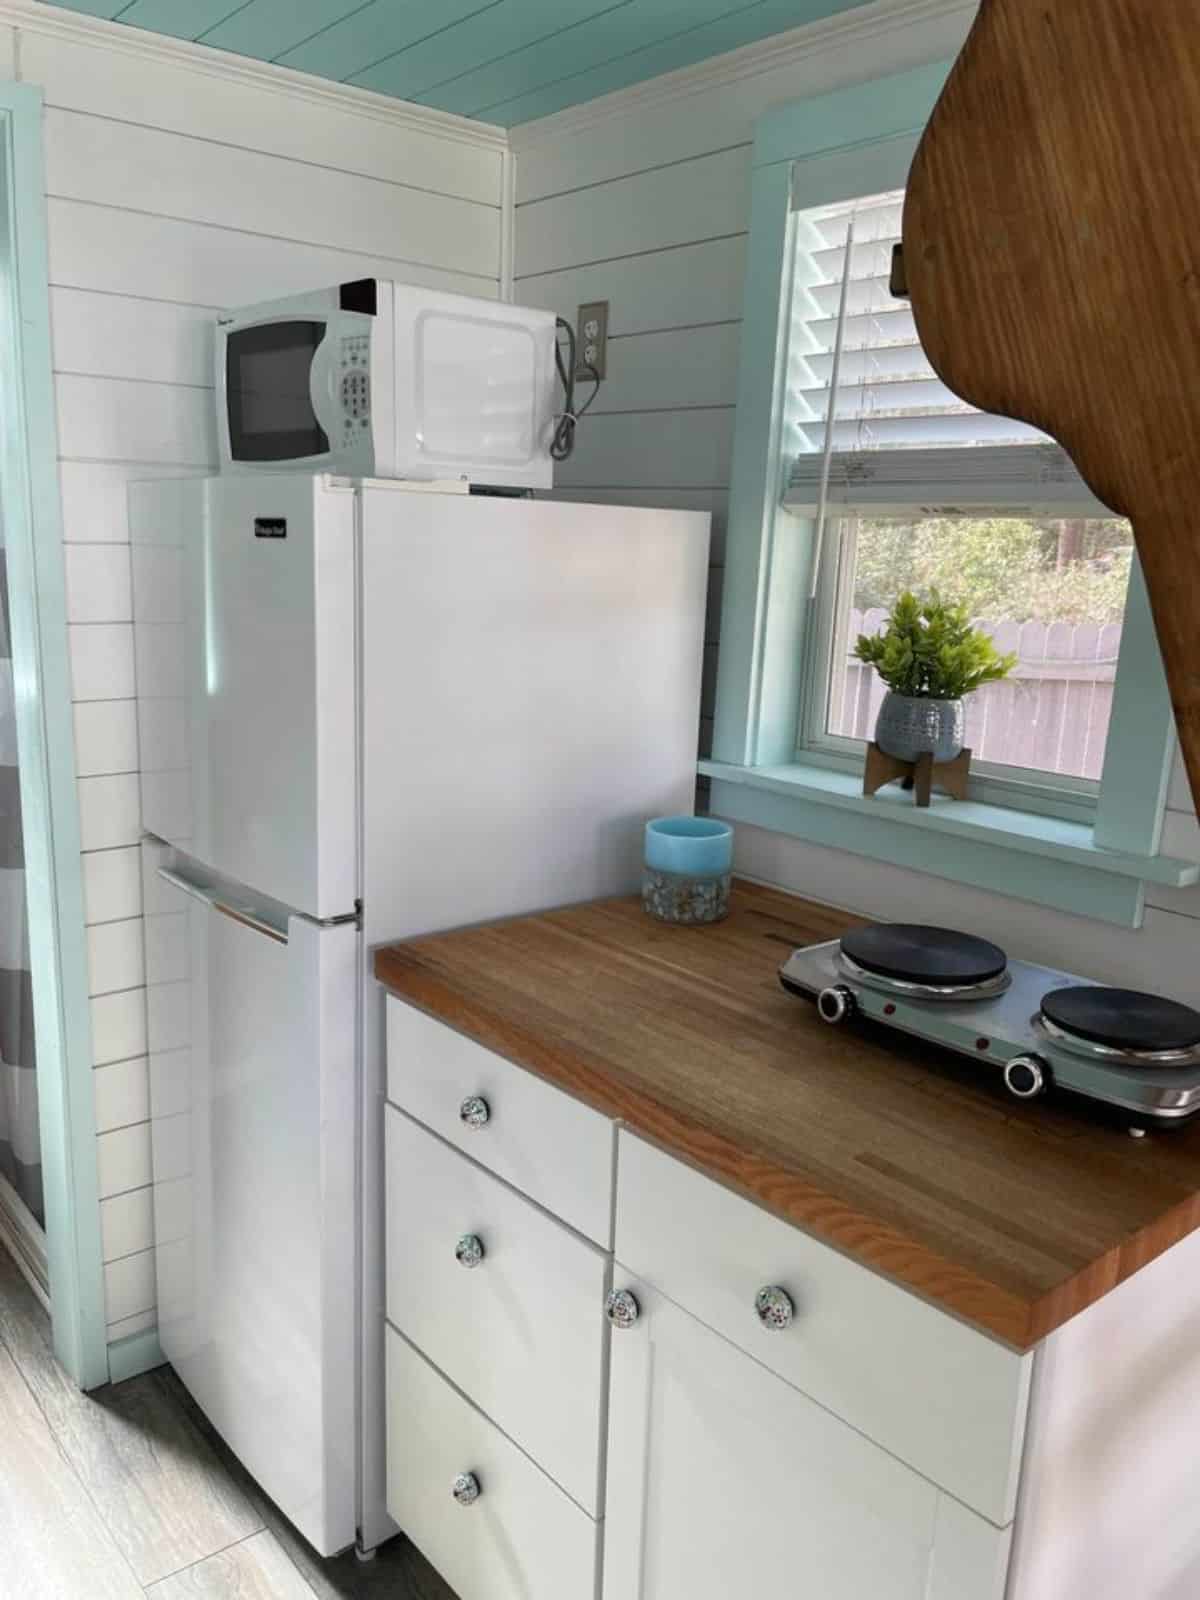 Refrigerator, microwave, and a 2-burner cooktop with storage cabinets on the other side